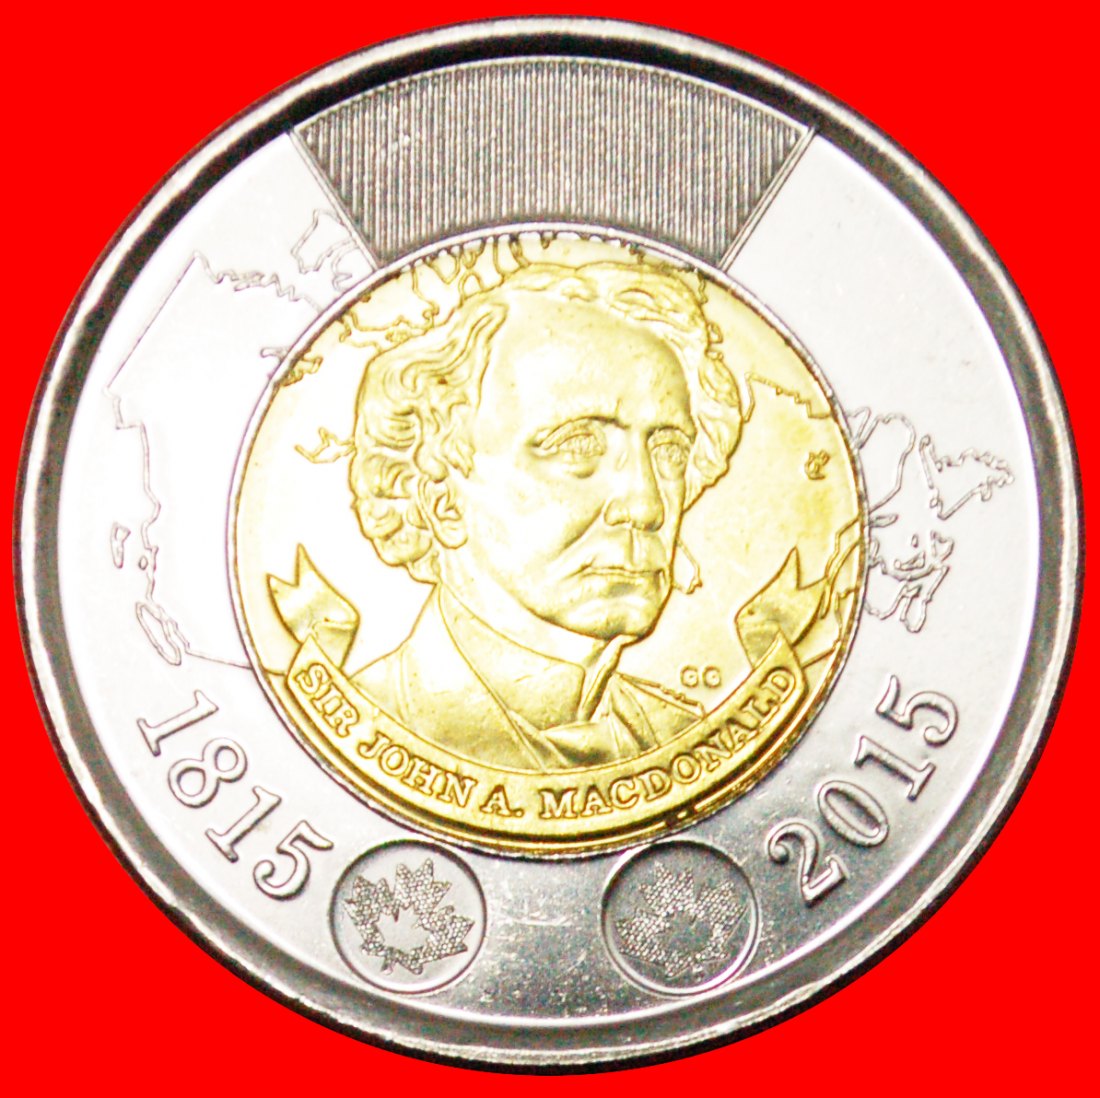  * FATHER OF CONFEDERATION: CANADA ★ 2 DOLLARS 1815-2015 UNC!!! MINT LUSTER! LOW START ★ NO RESERVE!   